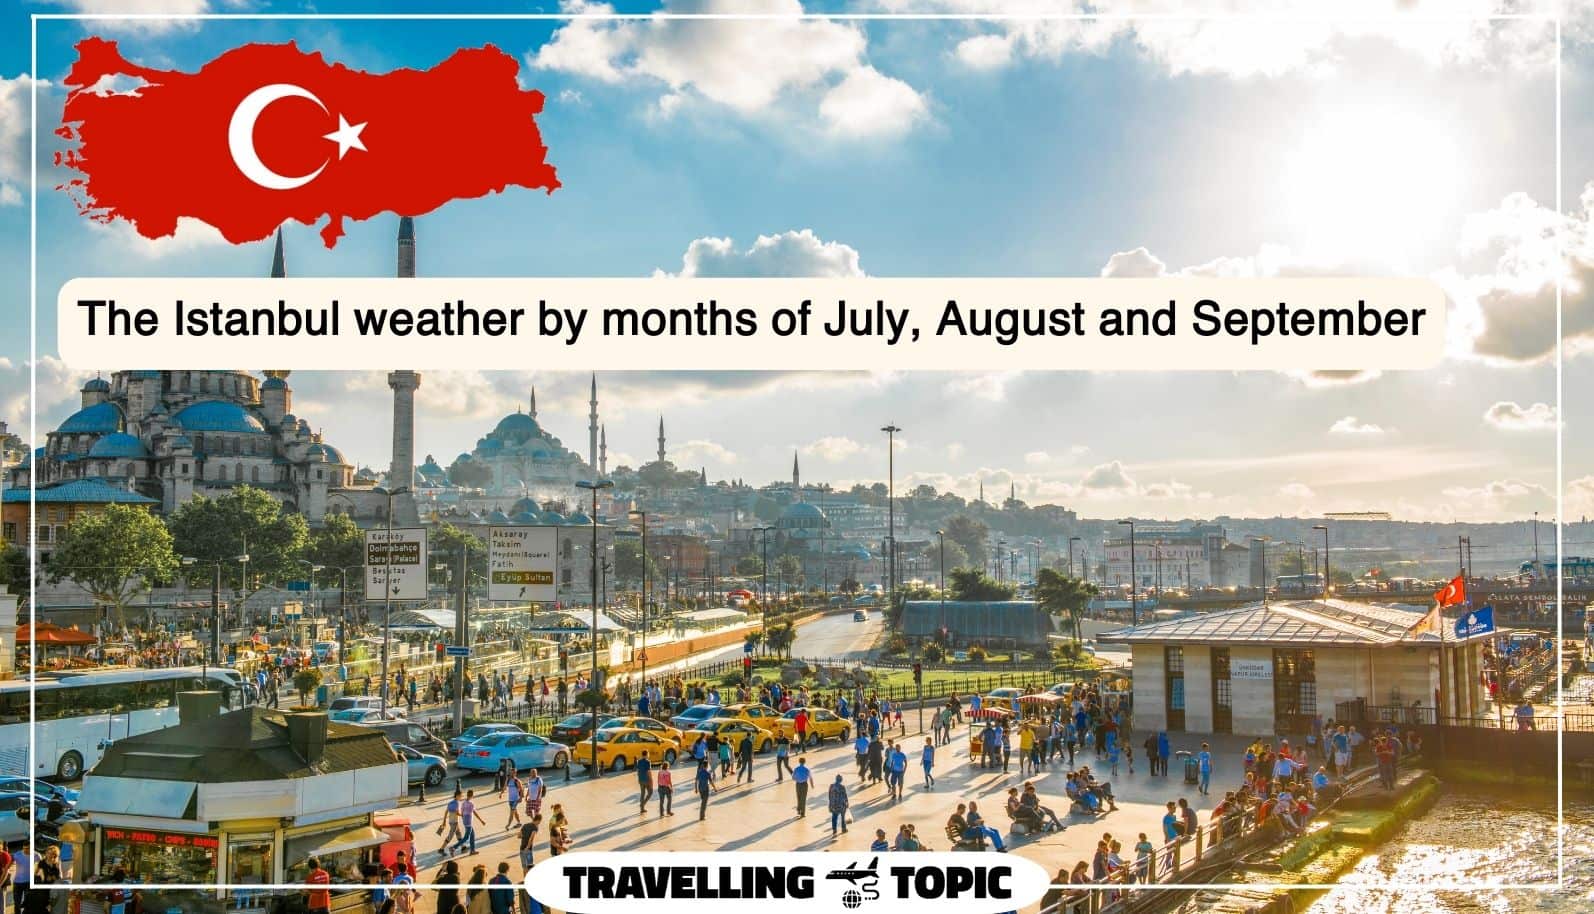 The Istanbul weather by months of July, August and September